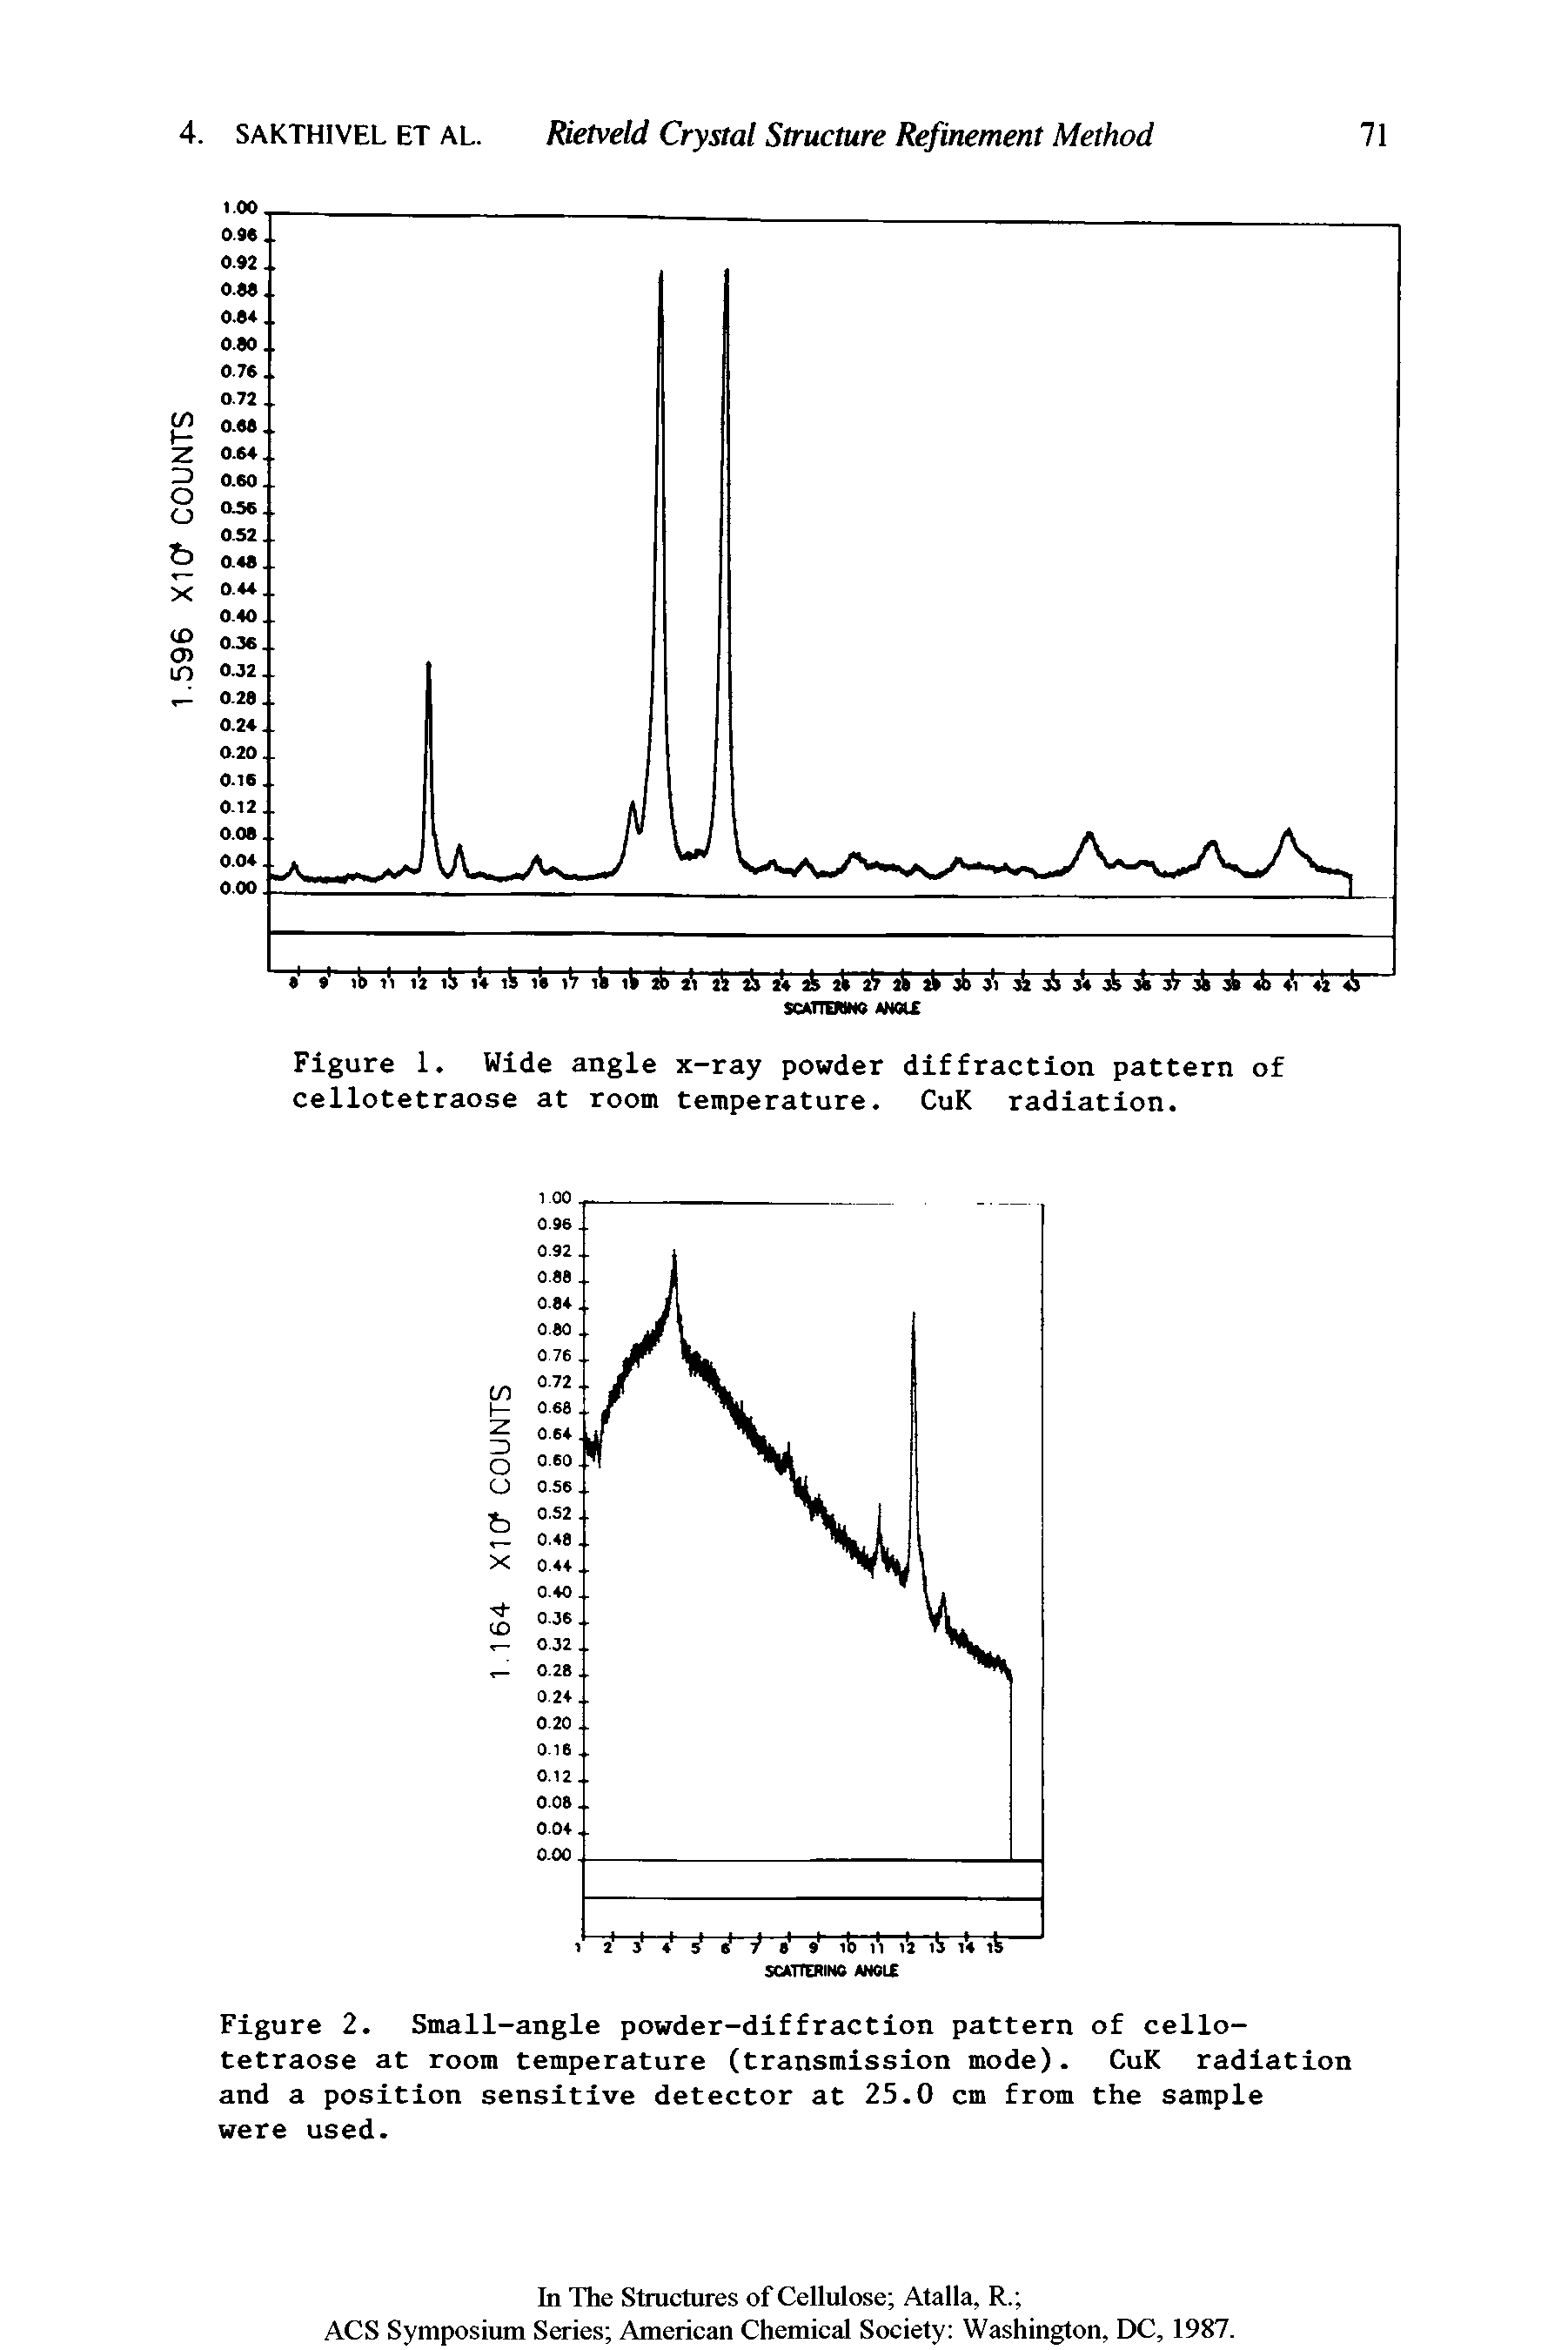 Figure 2. Small-angle powder-diffraction pattern of cellotetraose at room temperature (transmission mode). CuK radiation and a position sensitive detector at 25.0 cm from the sample were used.